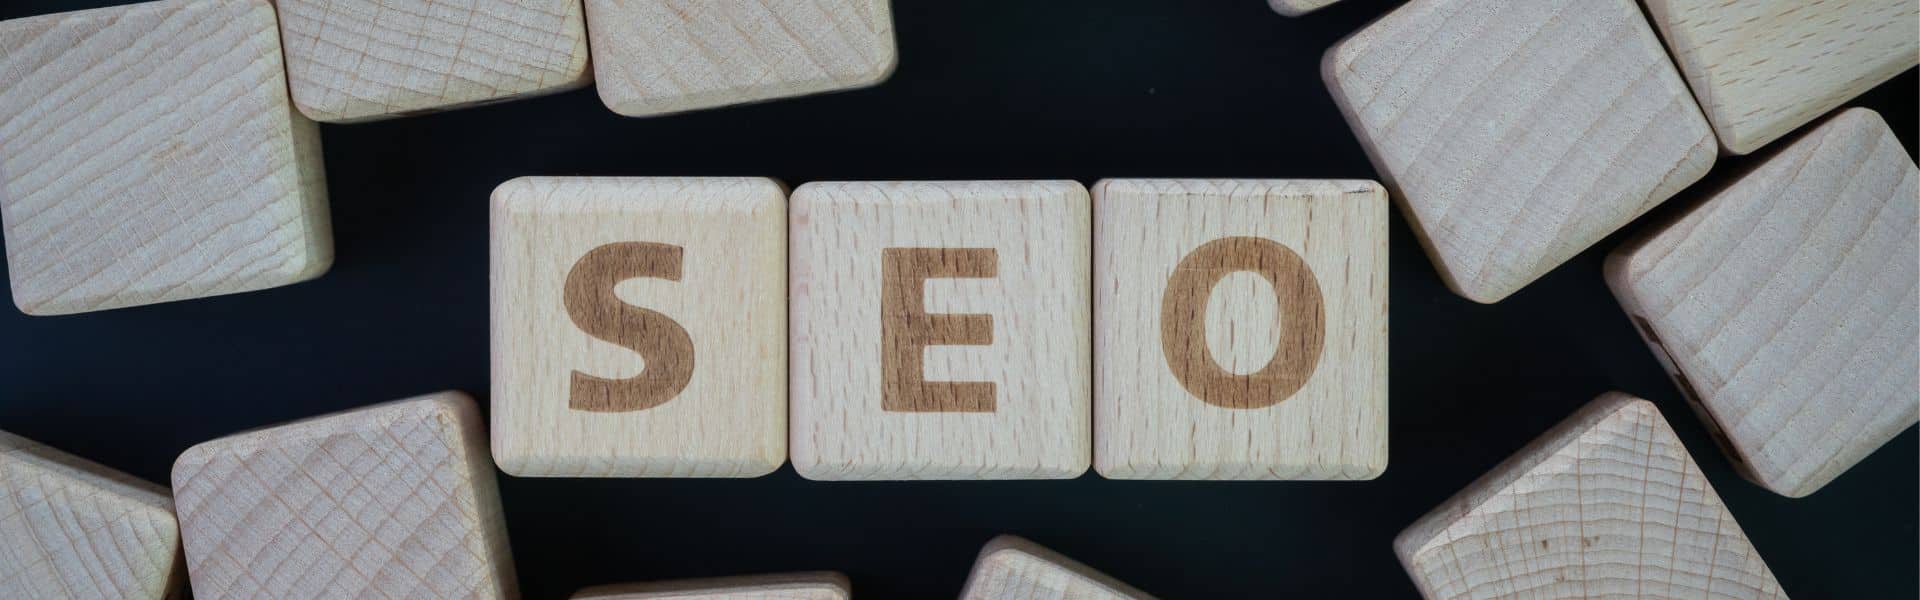 Affordable SEO Services for Small Businesses